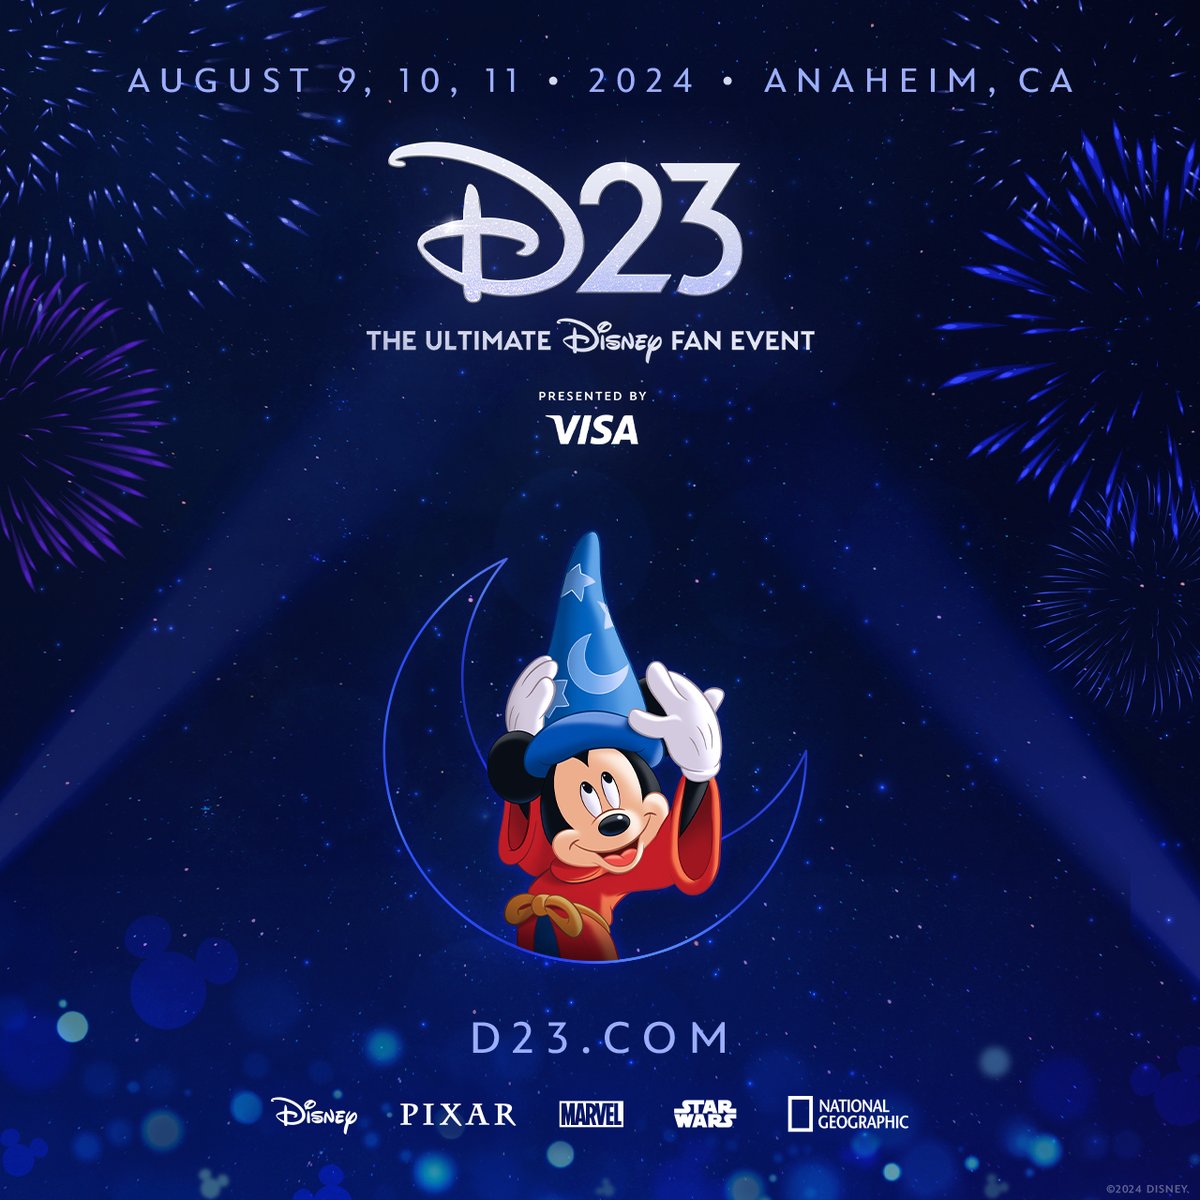 Disney Legends announced! Ticket details revealed! So, so many cool cars! #D23 Keep up with all the D23: The Ultimate Disney Fan Event news announced today: di.sn/6001kmWRX